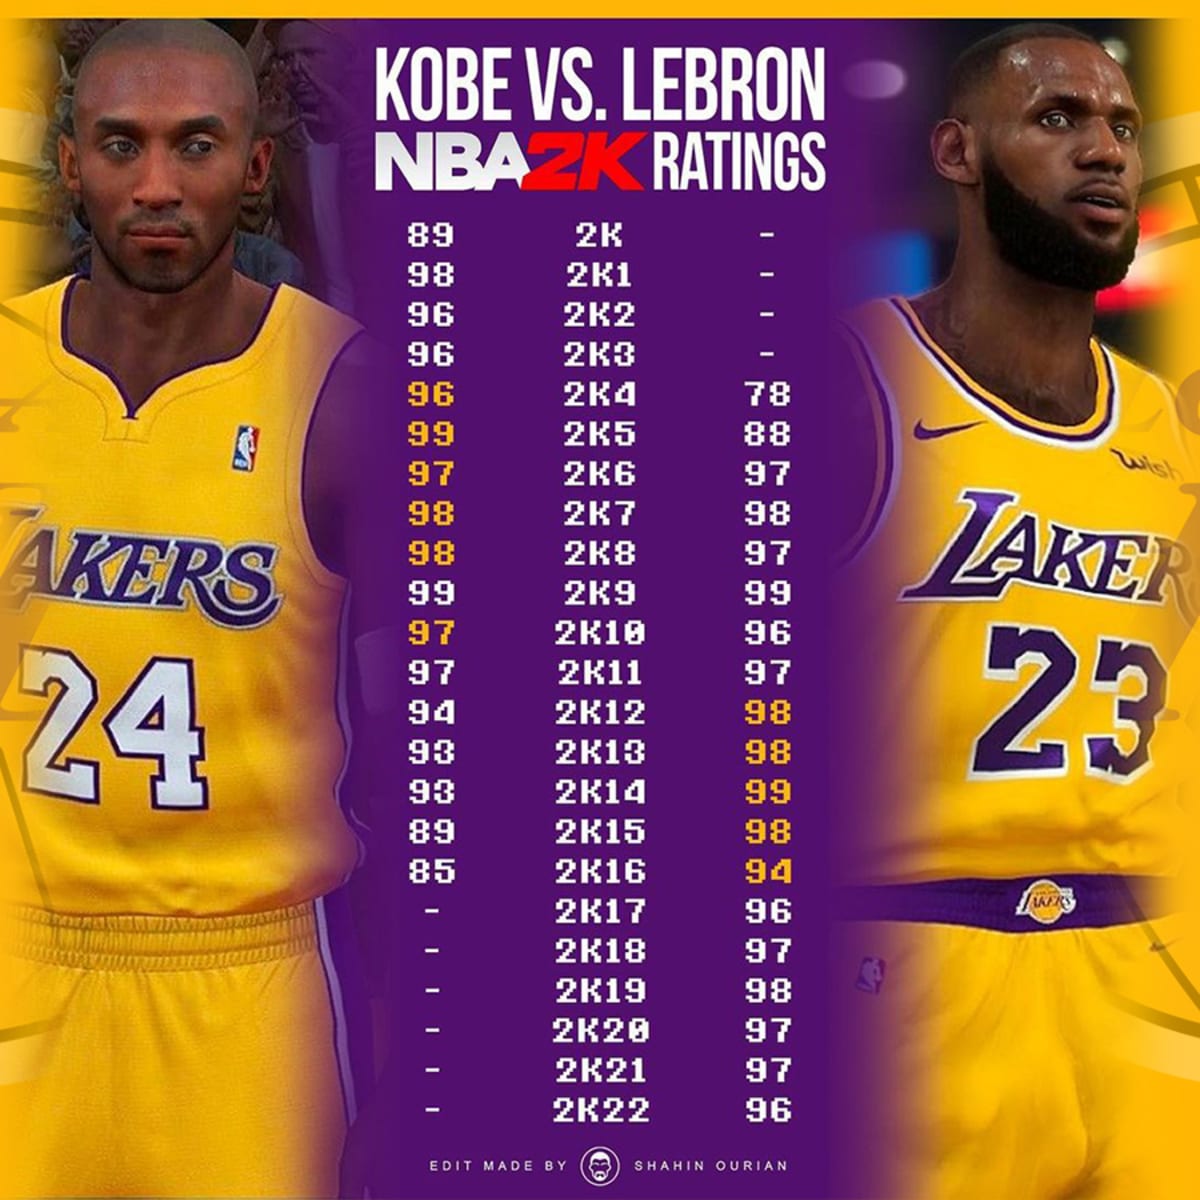 The five worst ratings of NBA 2K19 - YP